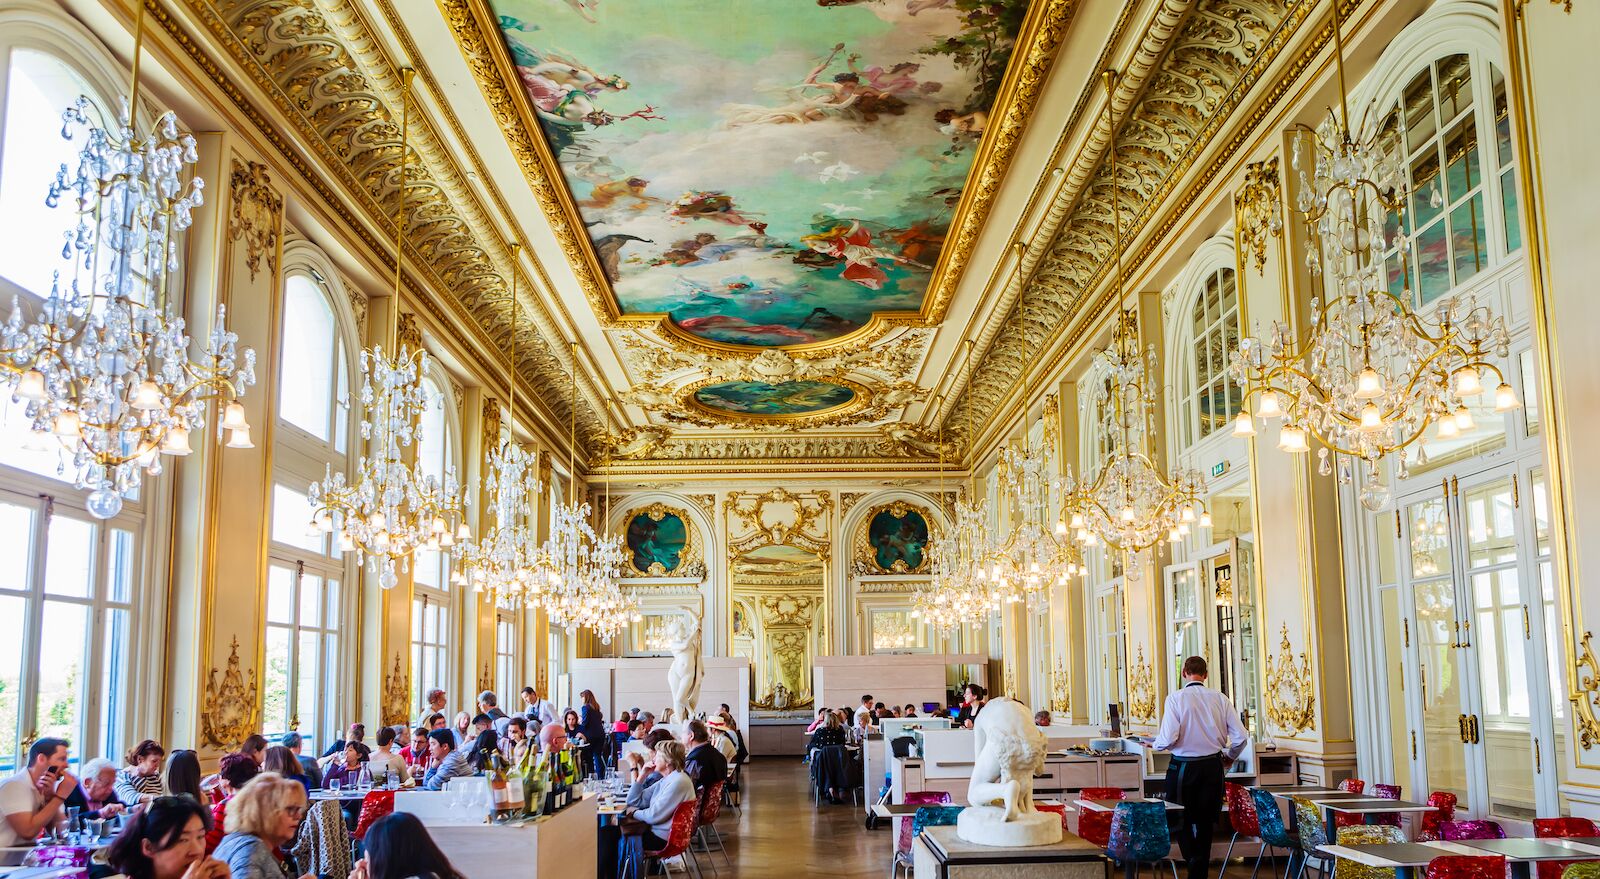 Restaurant at the Musée d'Orsay